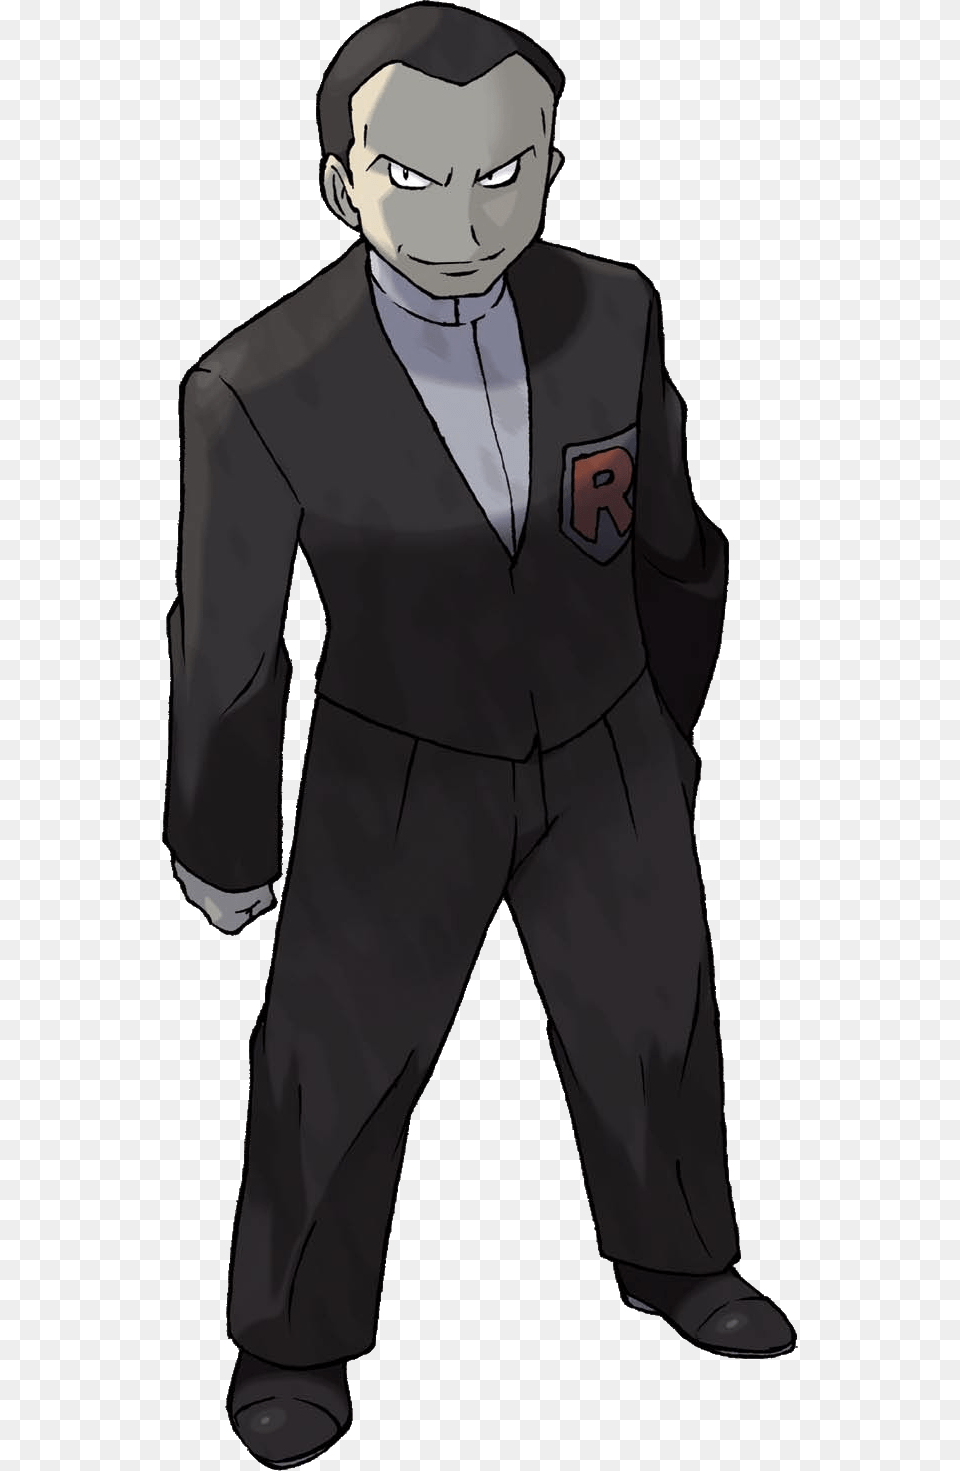 Giovanni Giovanni Pokemon Hgss, Tuxedo, Clothing, Suit, Formal Wear Png Image